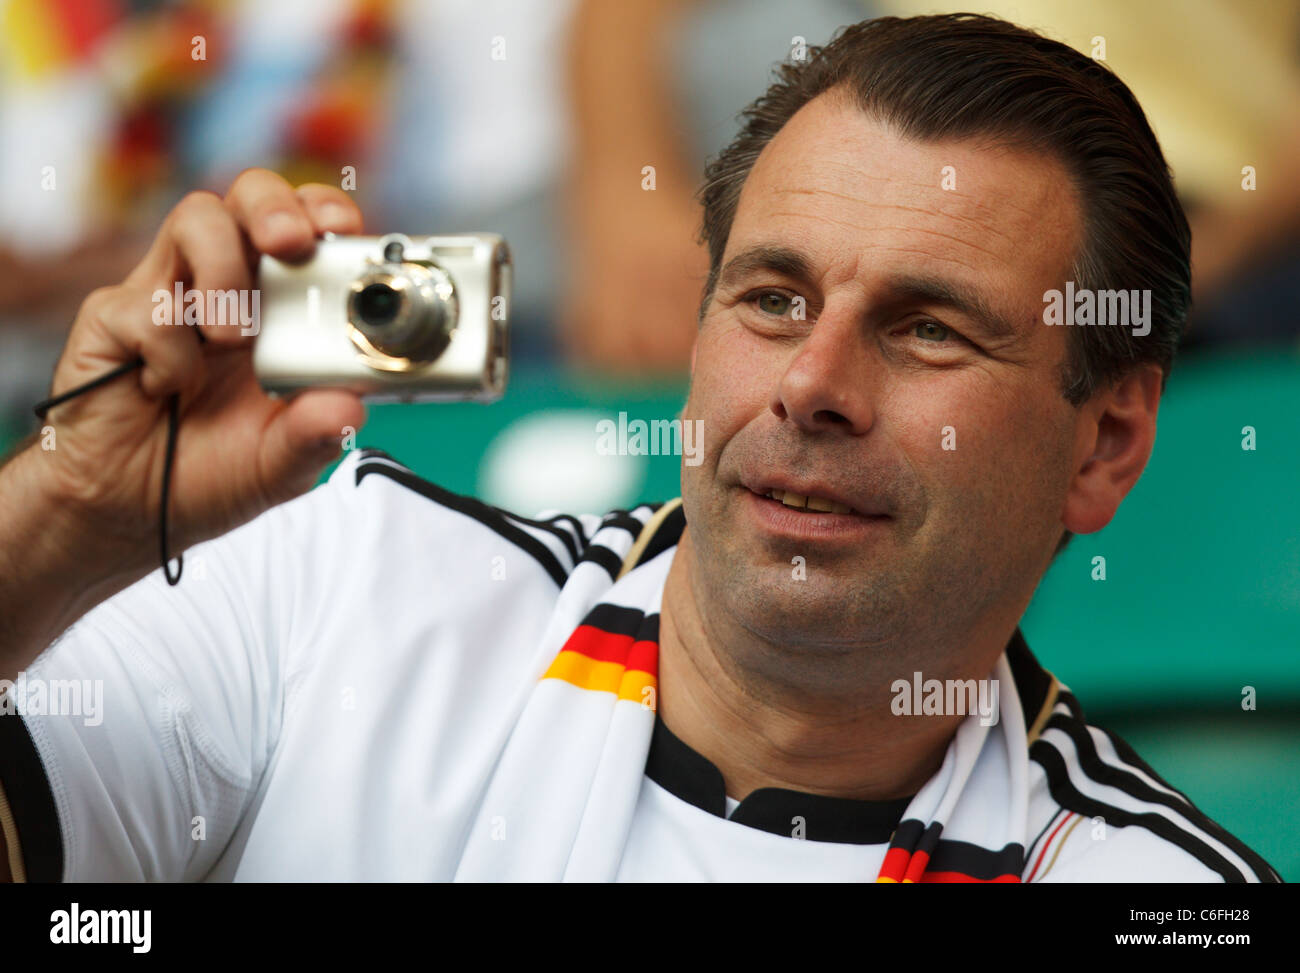 A Germany supporter takes pictures at a 2011 Women's World Cup quarterfinal soccer match between Germany and Japan. Stock Photo